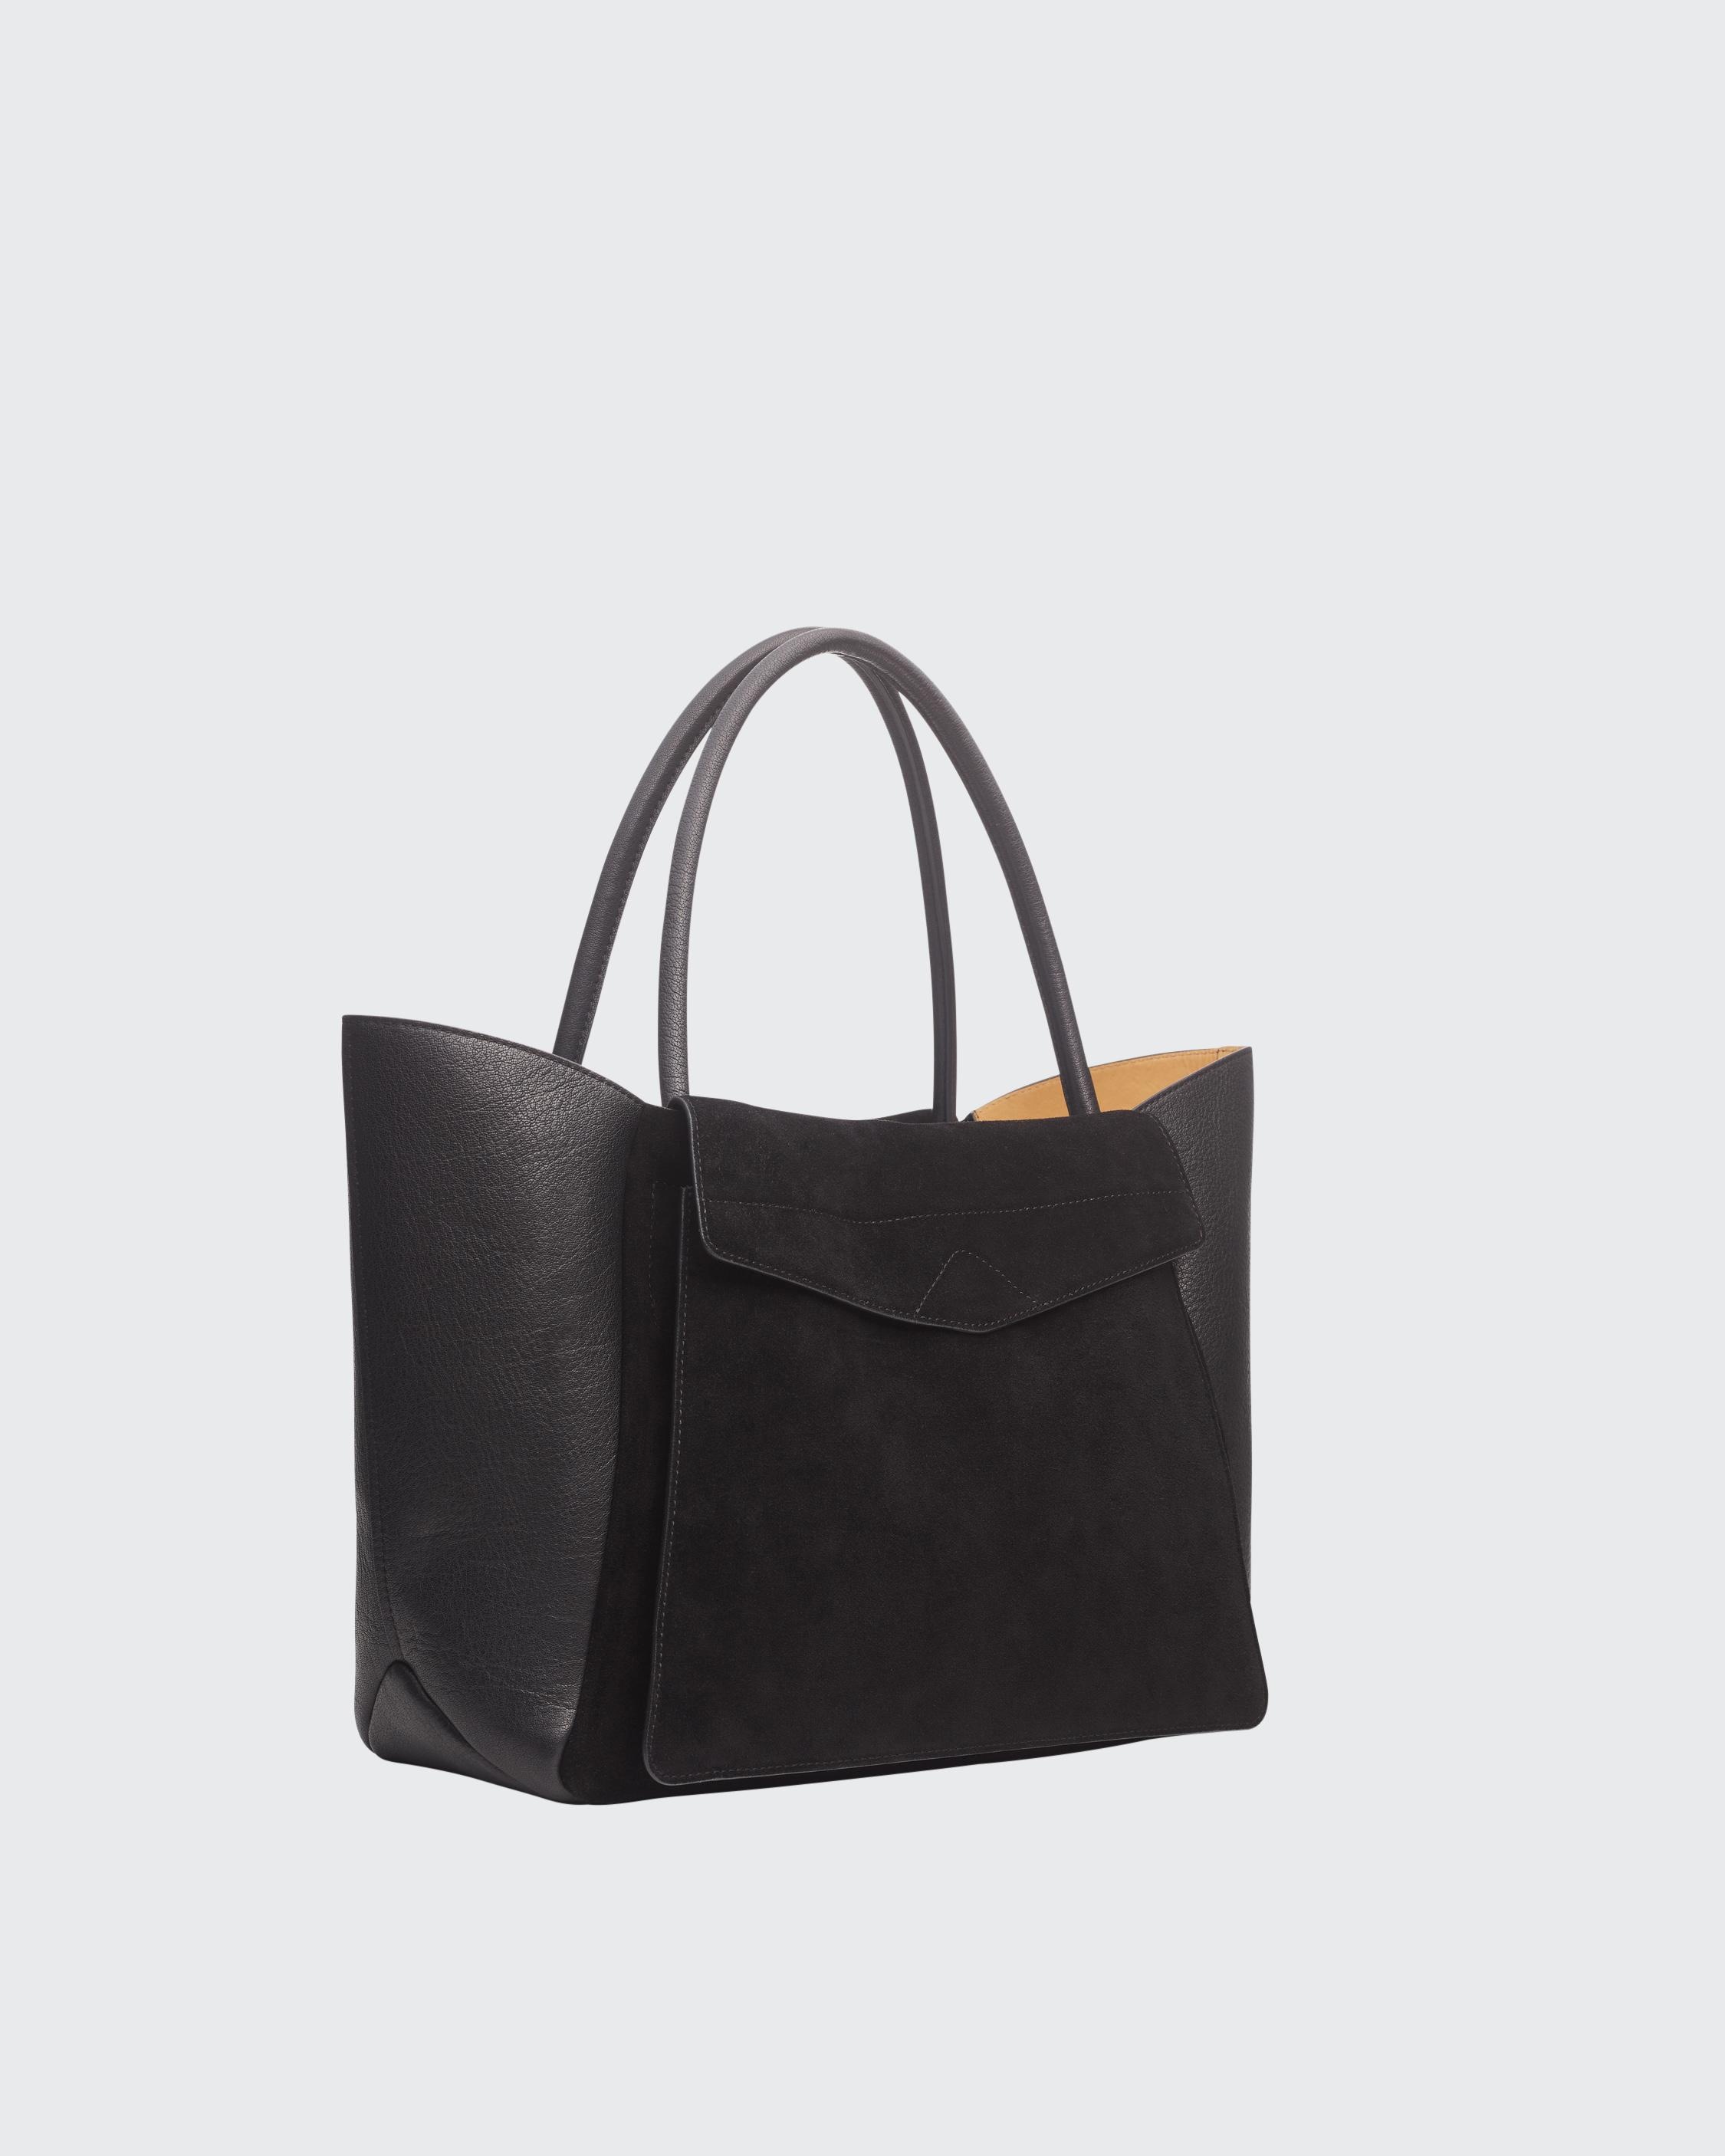 Runner Tote - Suede & Leather
Large Tote Bag - 3